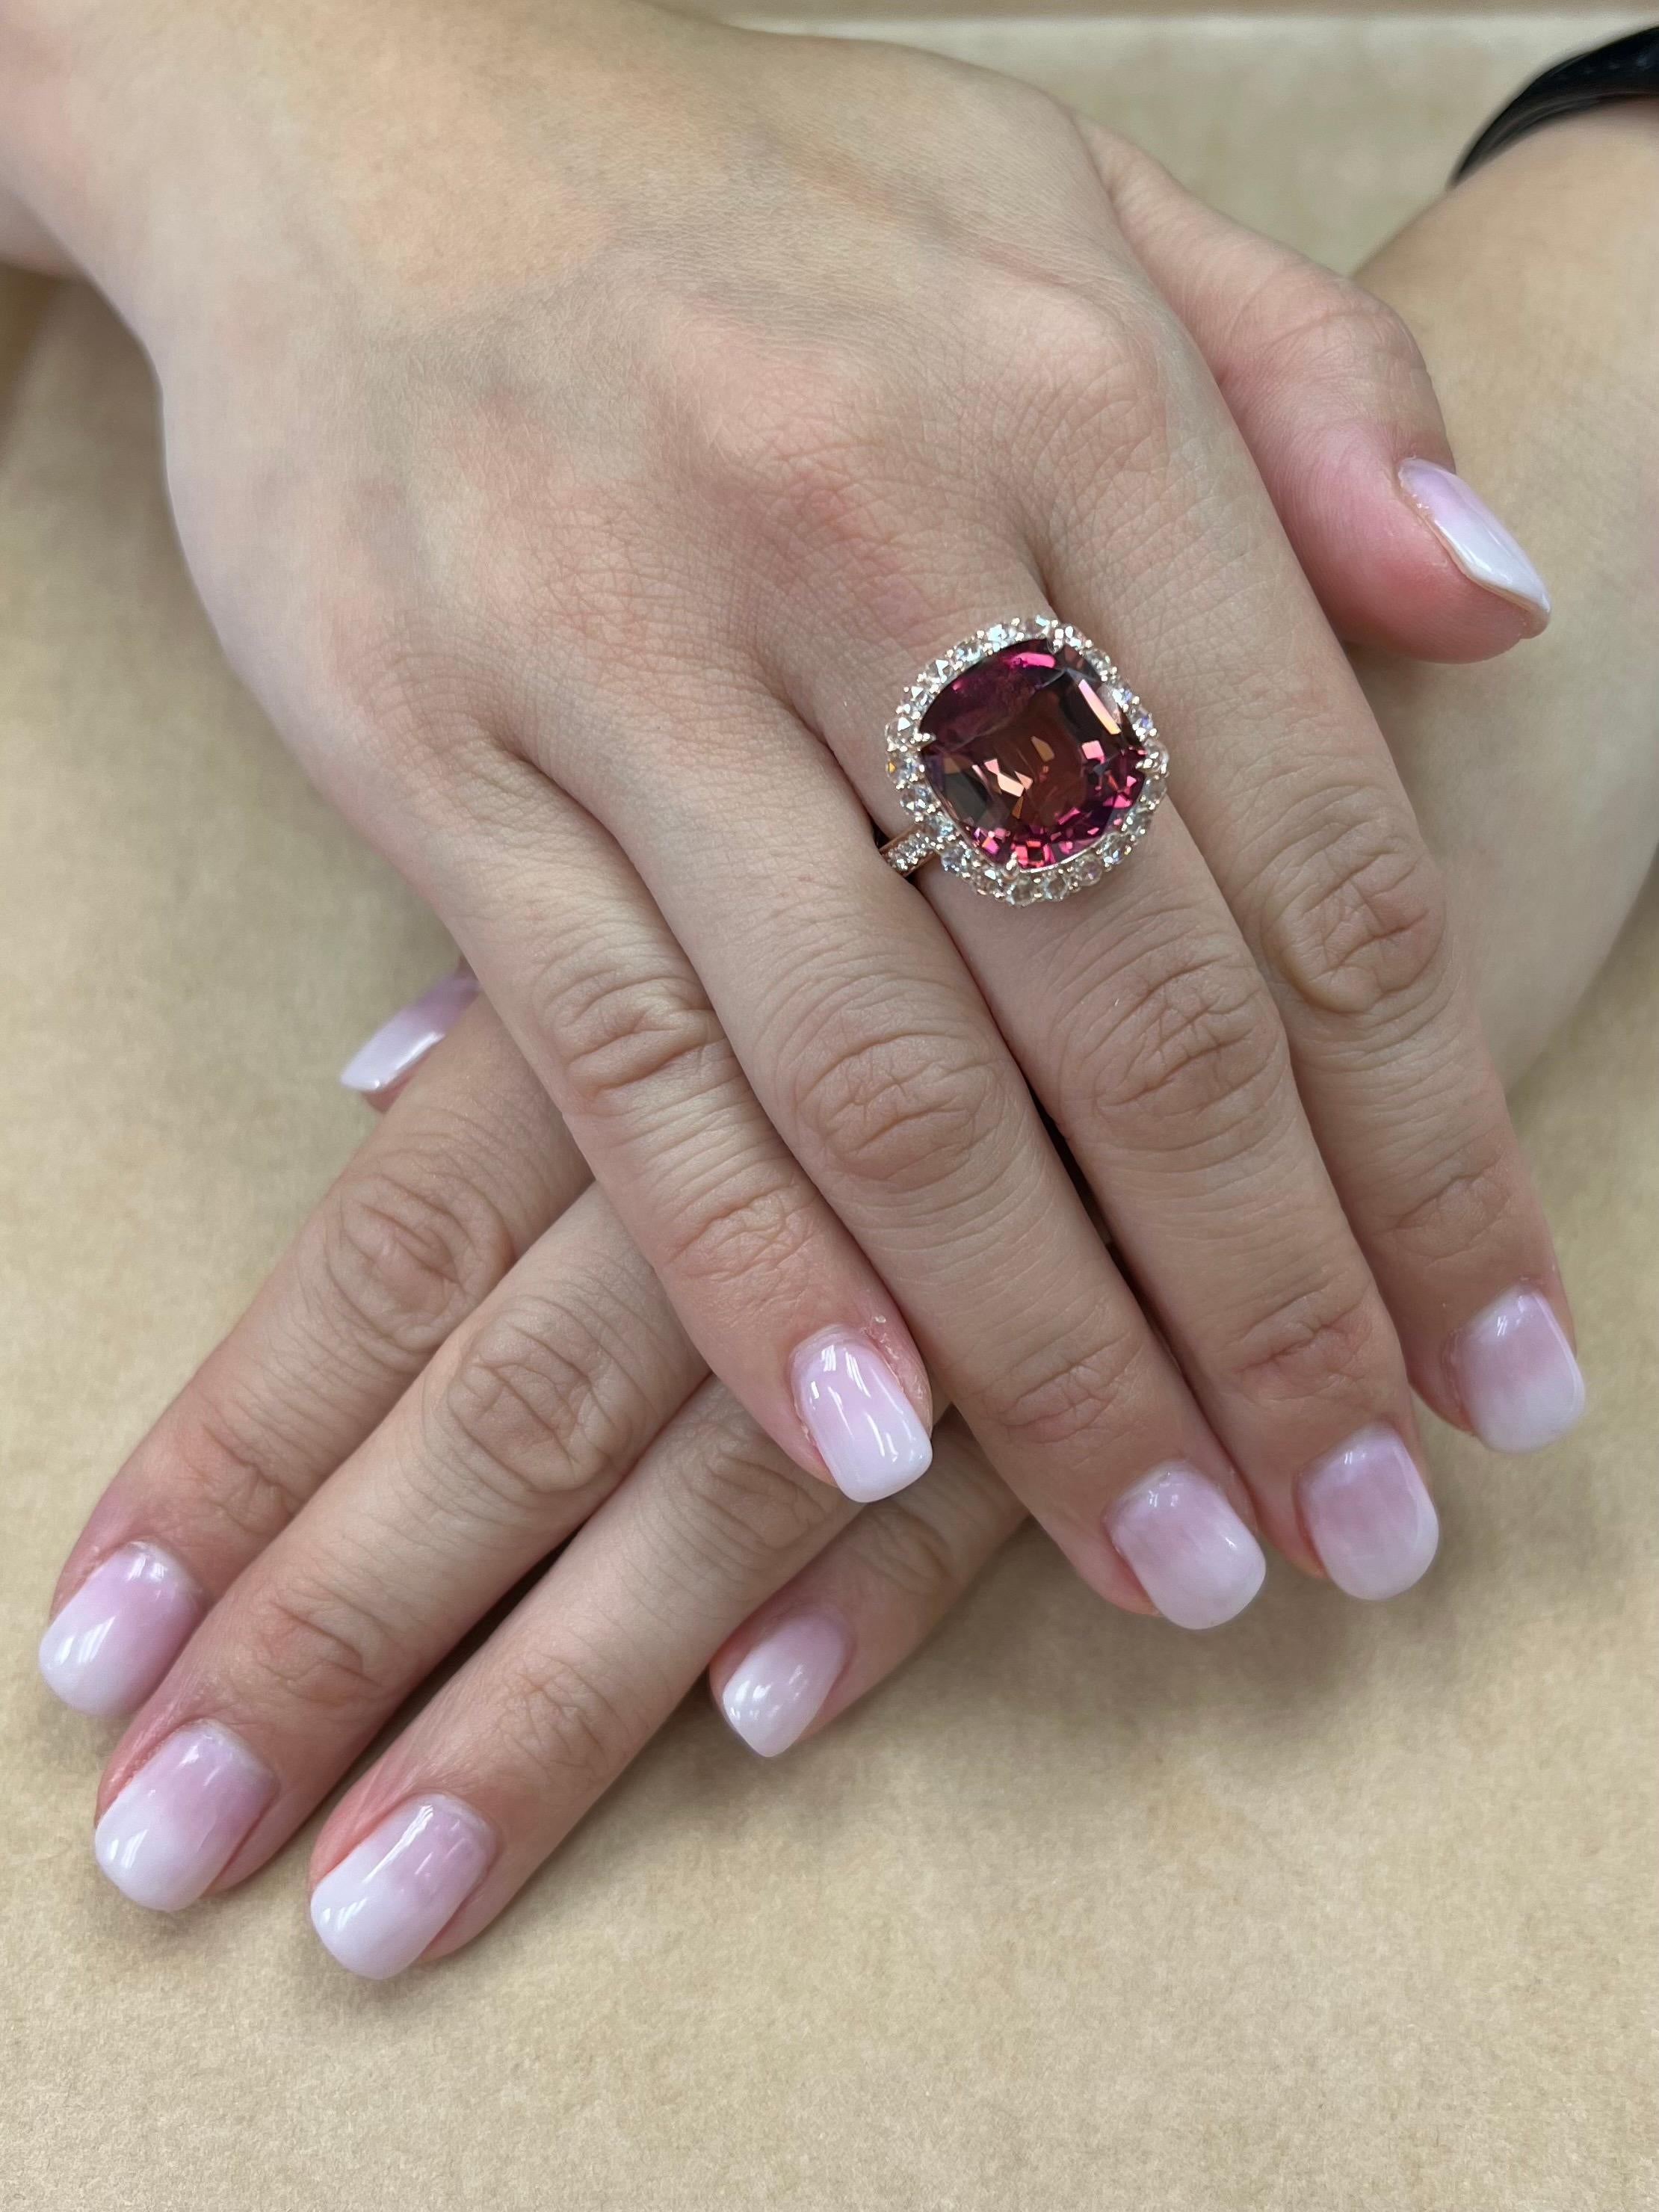 Please check out the HD video! Here is a large oversized 11.55 cts pink tourmaline ring. There are 22 new rose cut diamonds (0.83cts) forming a halo surrounding the center orange pink tourmaline. On the shank of the ring are 12 full cut diamonds